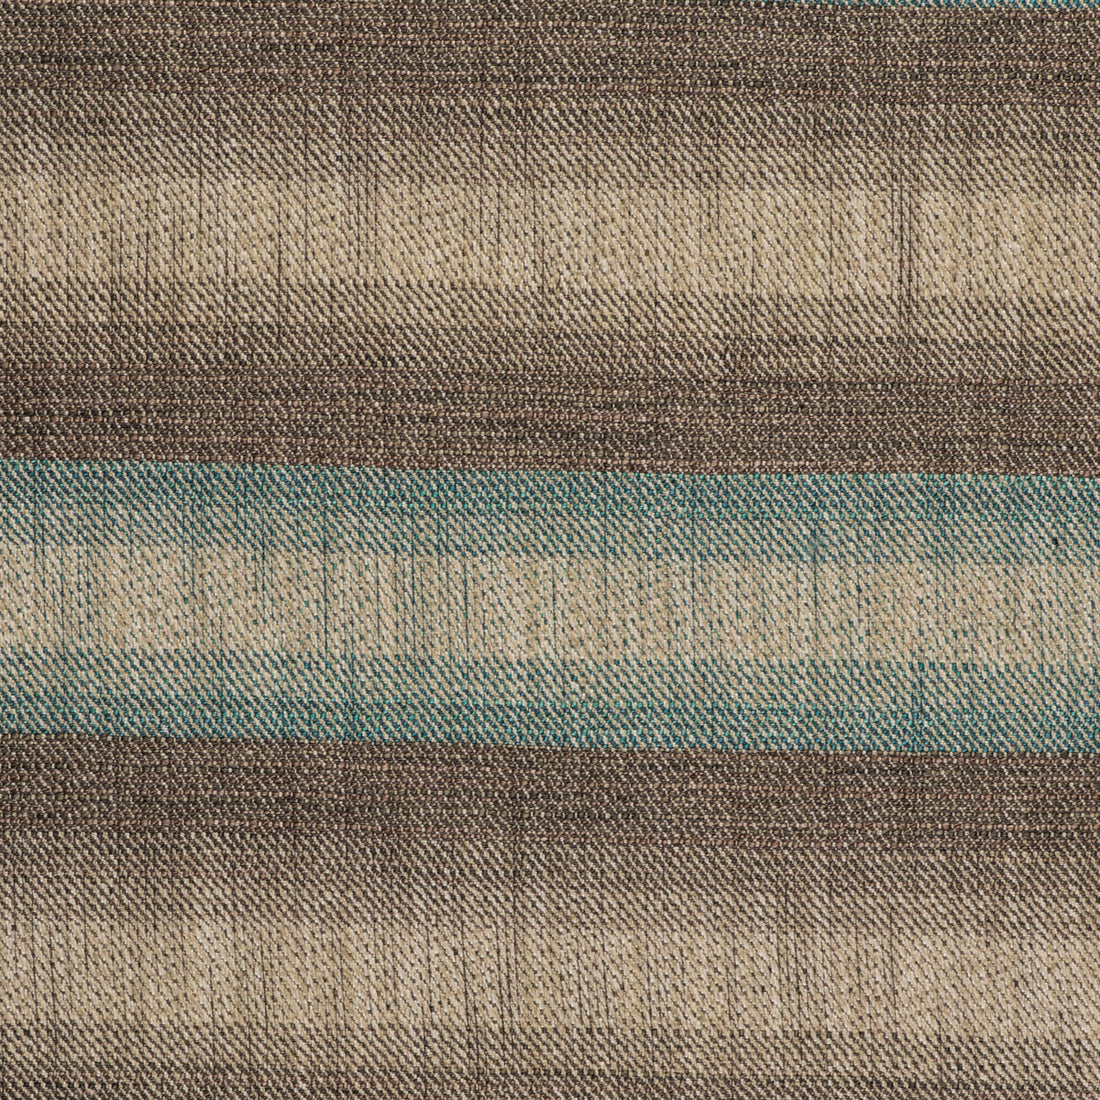 Horizontal fabric in agua color - pattern GDT5500.004.0 - by Gaston y Daniela in the Gaston Libreria collection